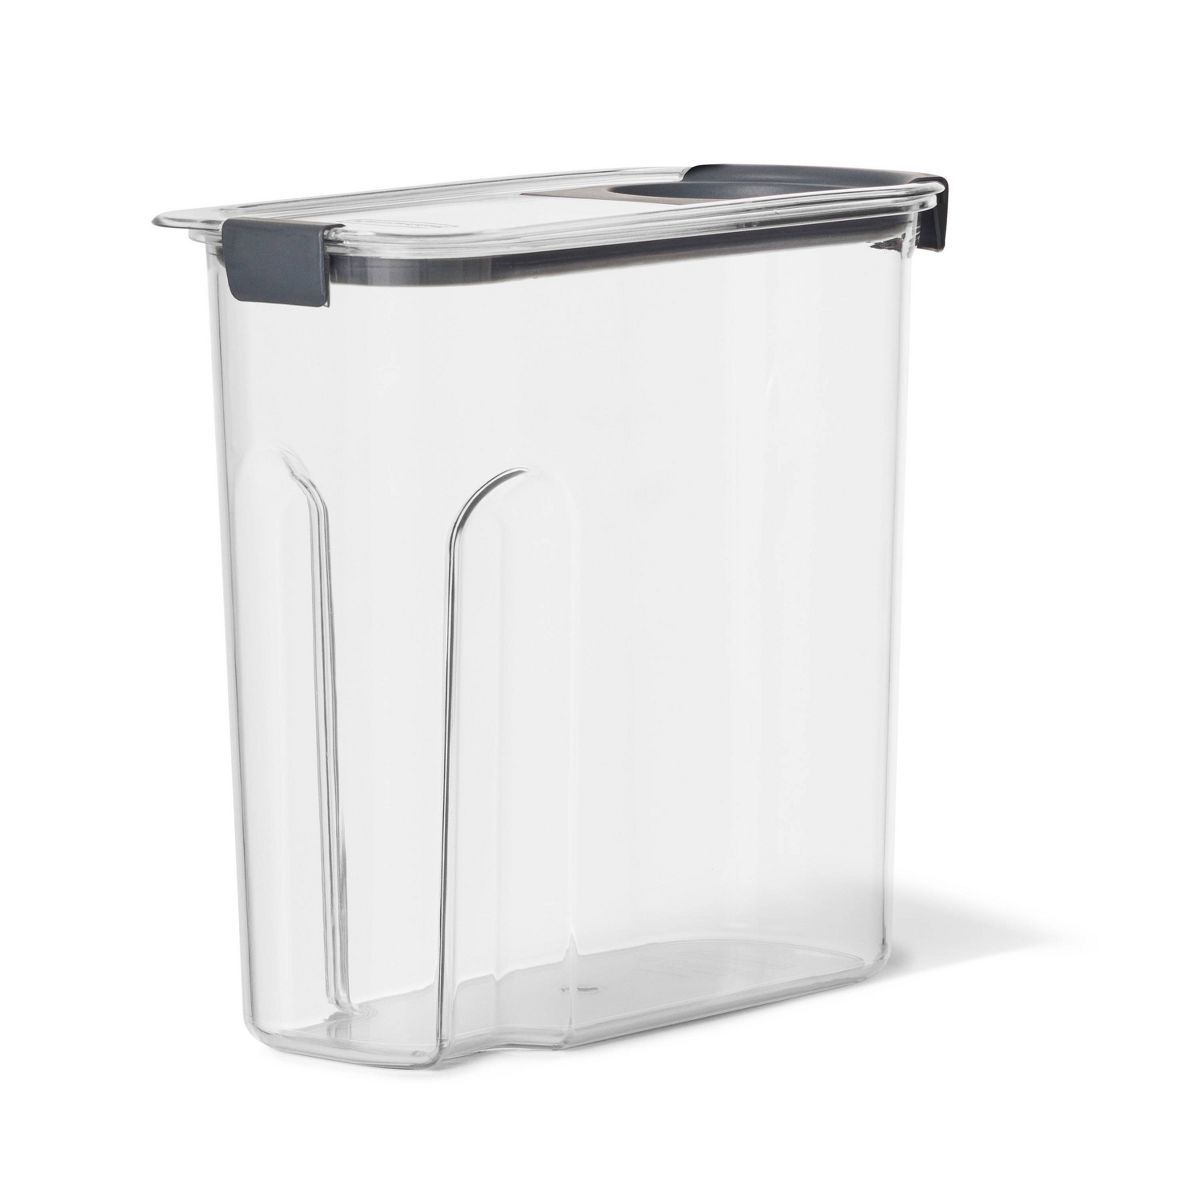 Rubbermaid Brilliance Pantry 18 Cup Cereal Keeper | Target